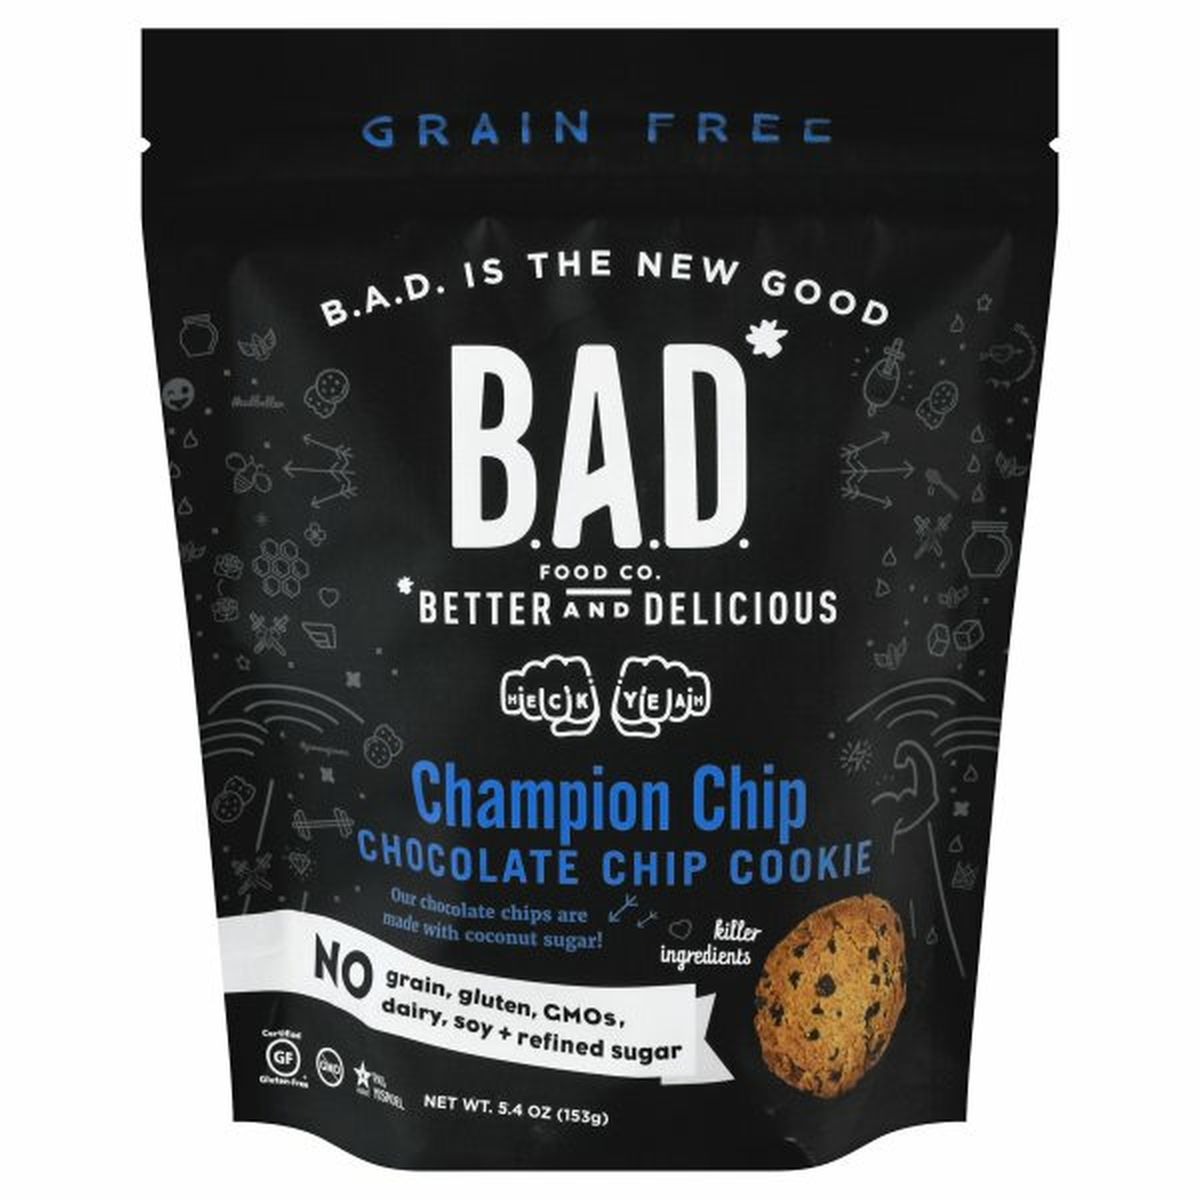 Calories in B.A.D. Food Co. Cookie, Grain Free, Champion Chip